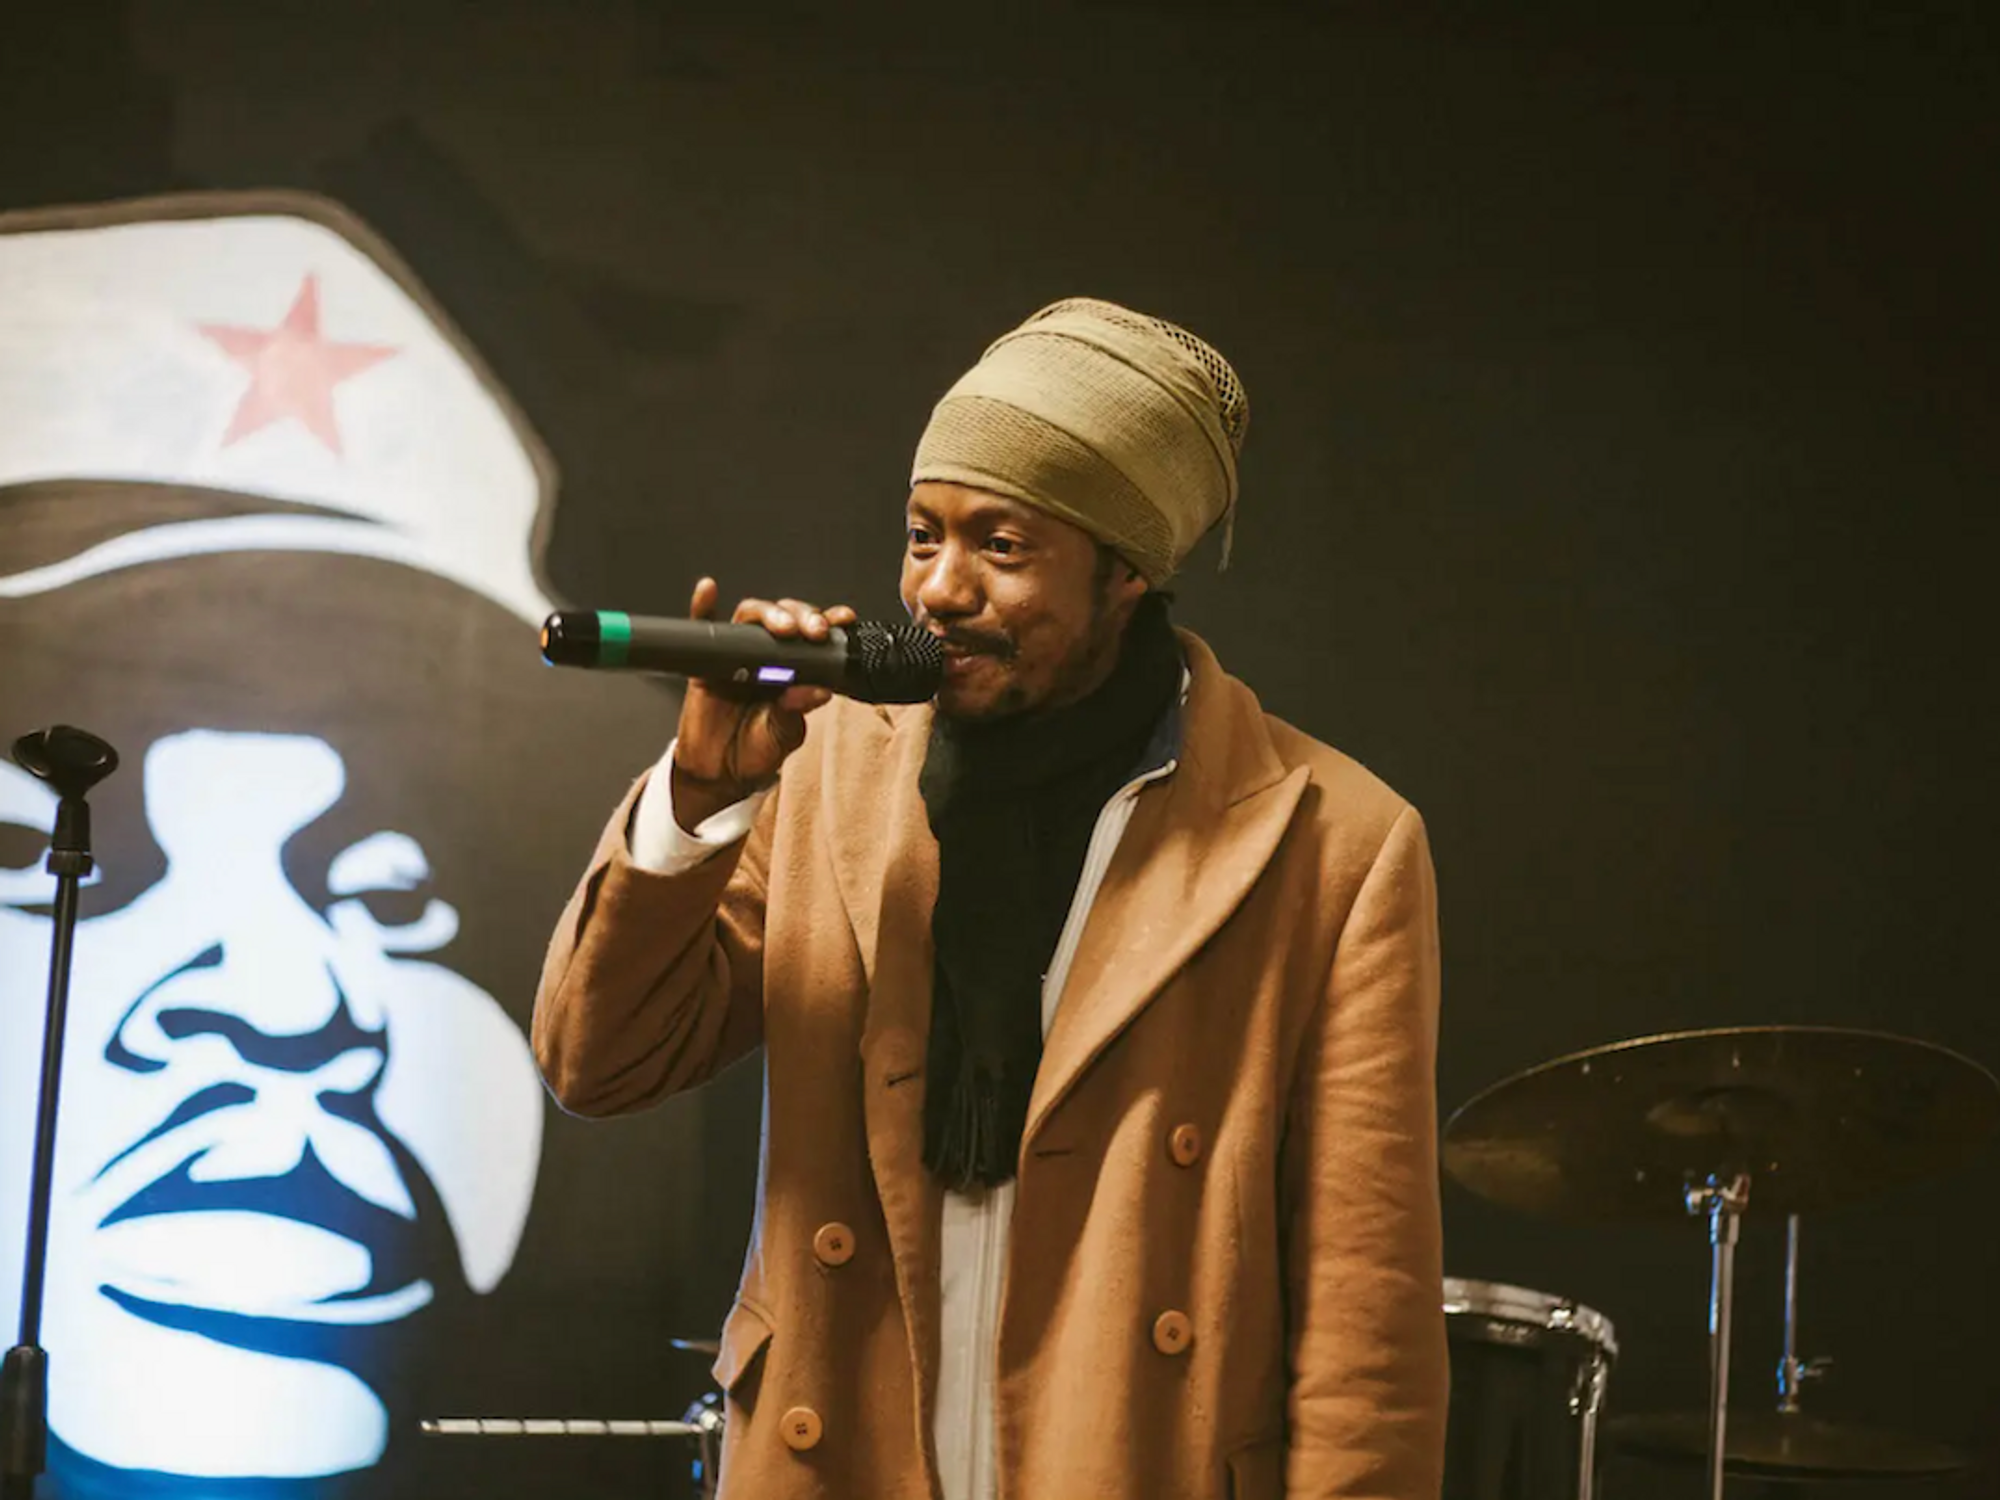 Hymphatic Thabs Proves His Pedigree on SOTRA Cyphers Appearance